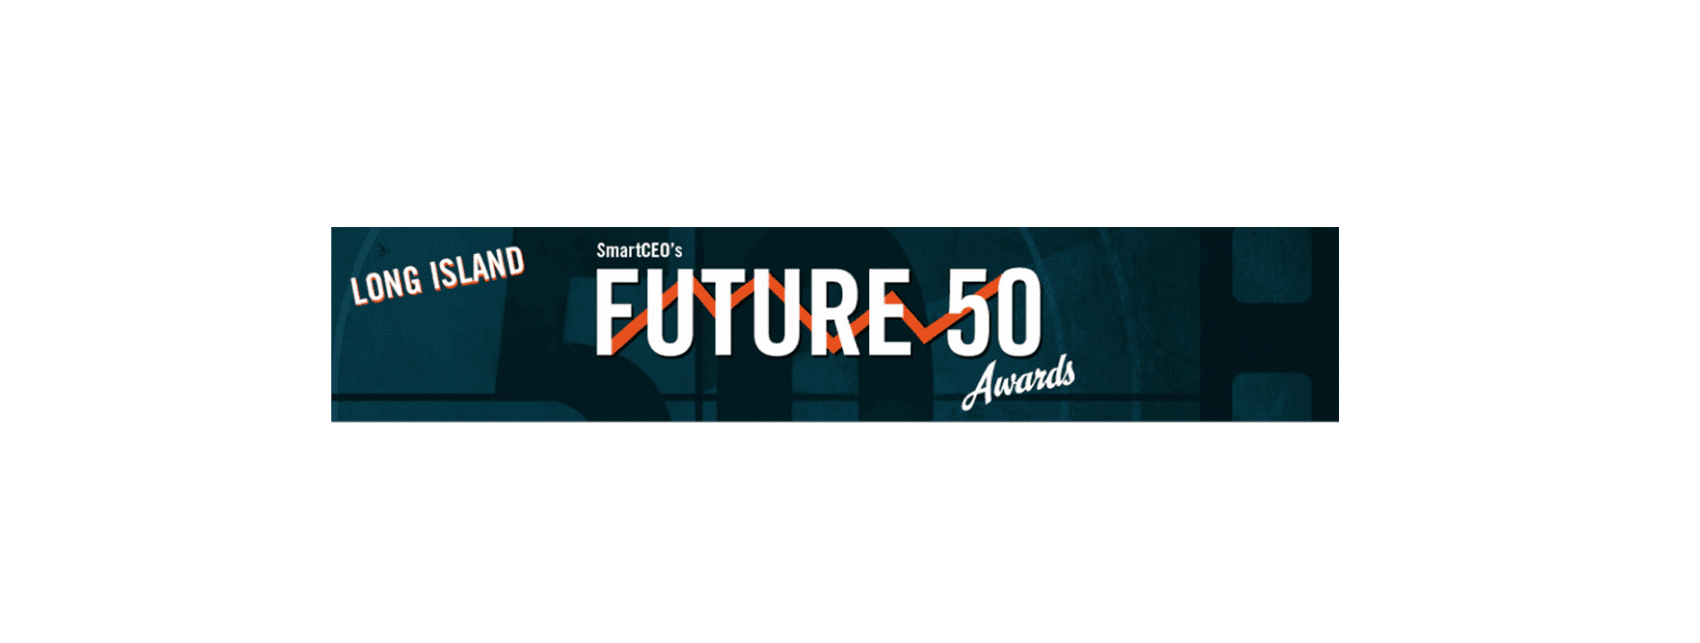 Smart CEO's Future 50 LI Awards Due Date Extended to 2/1